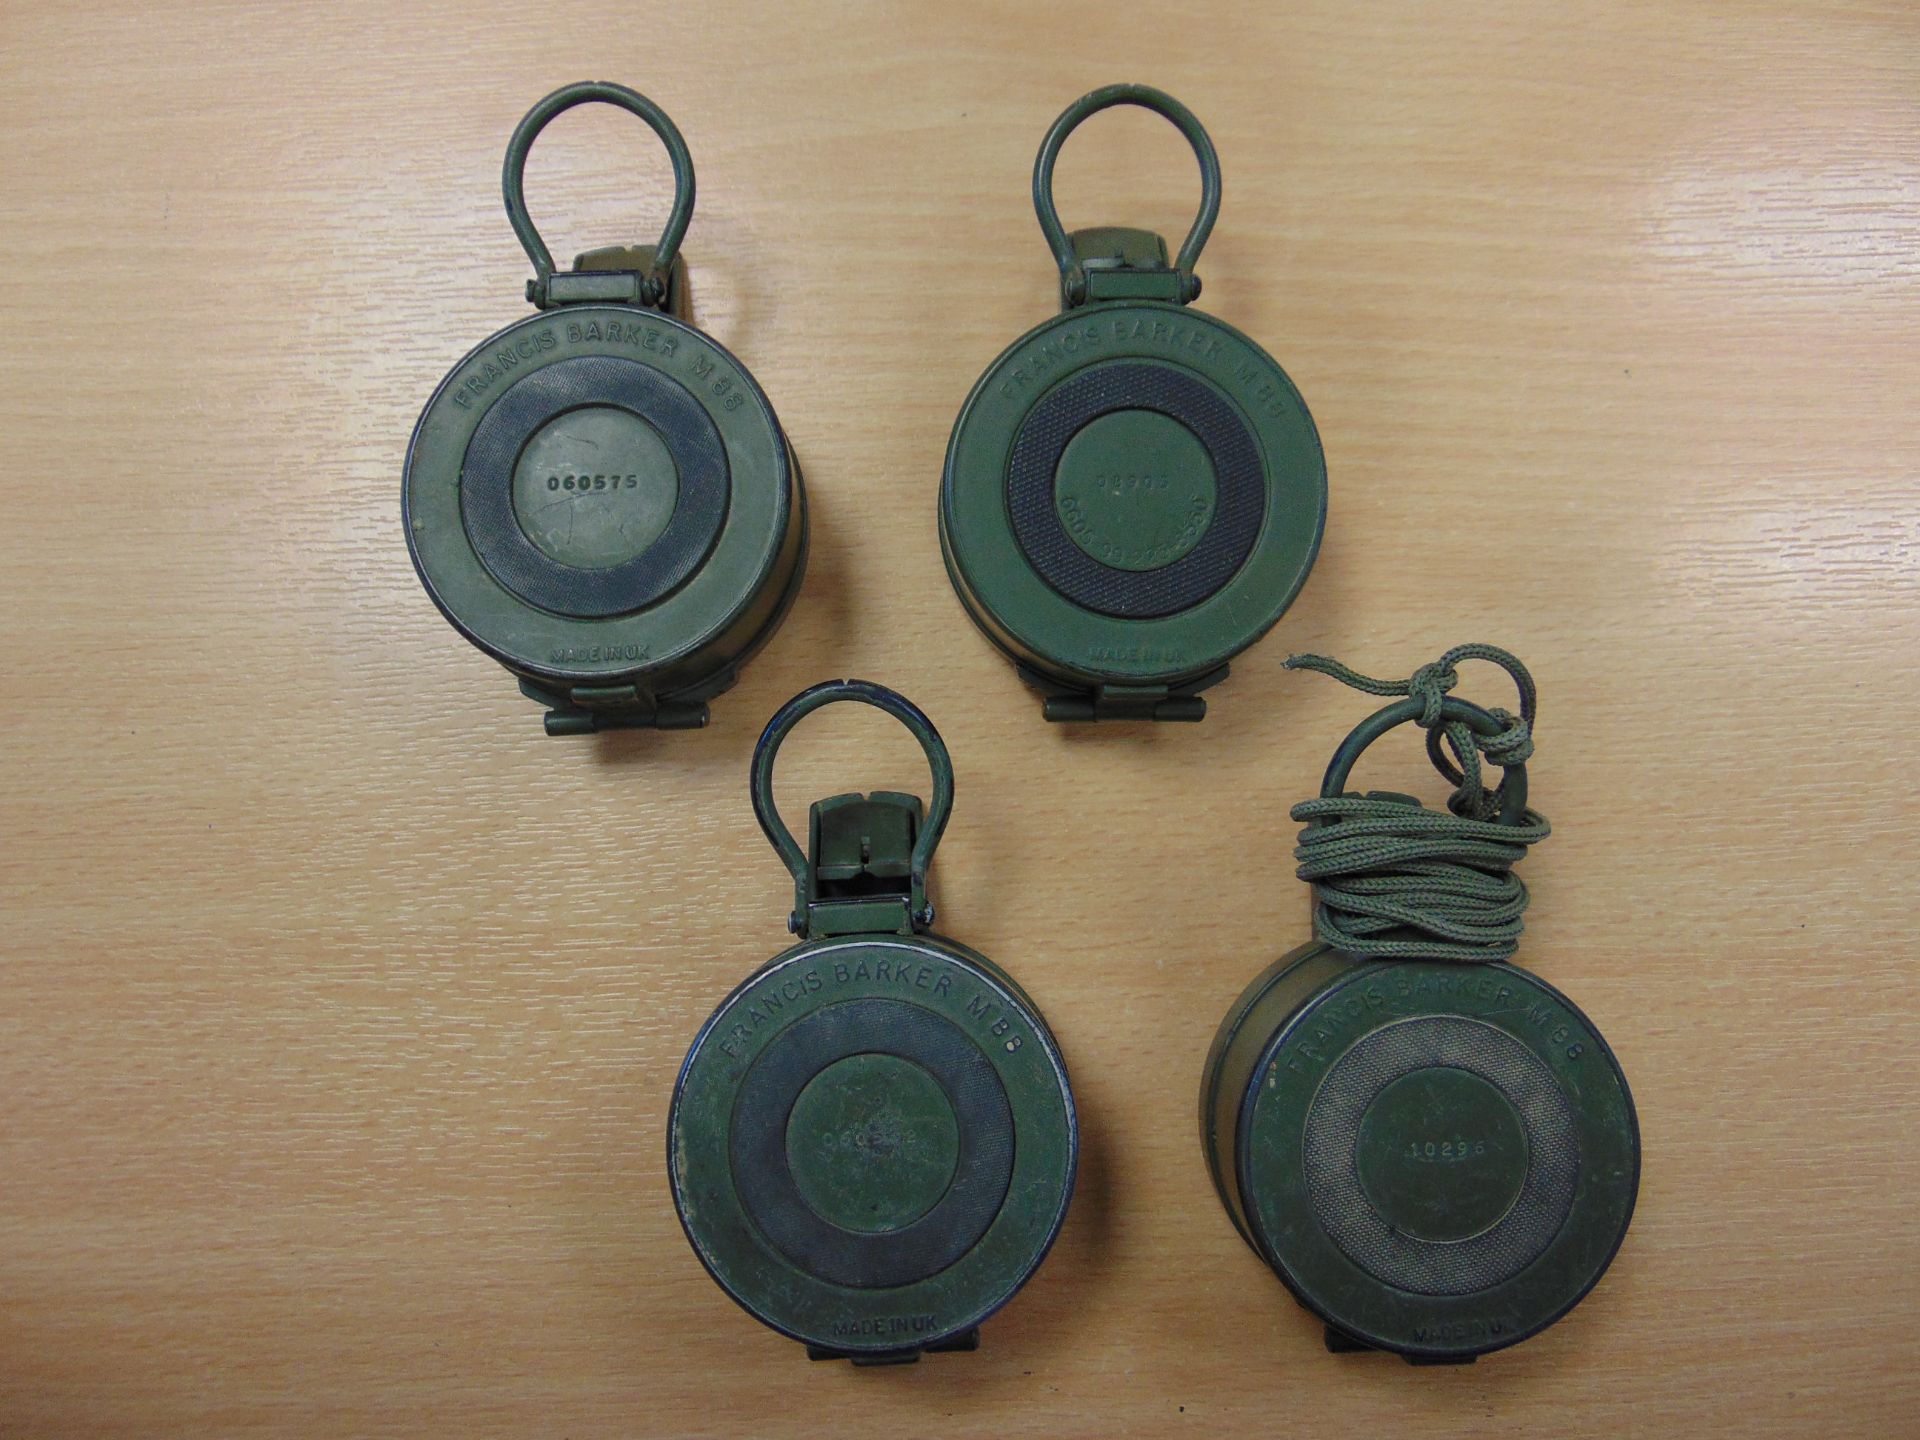 4 x Francis Barker M88 British Army Prismatic Compass in Mils - Image 6 of 6